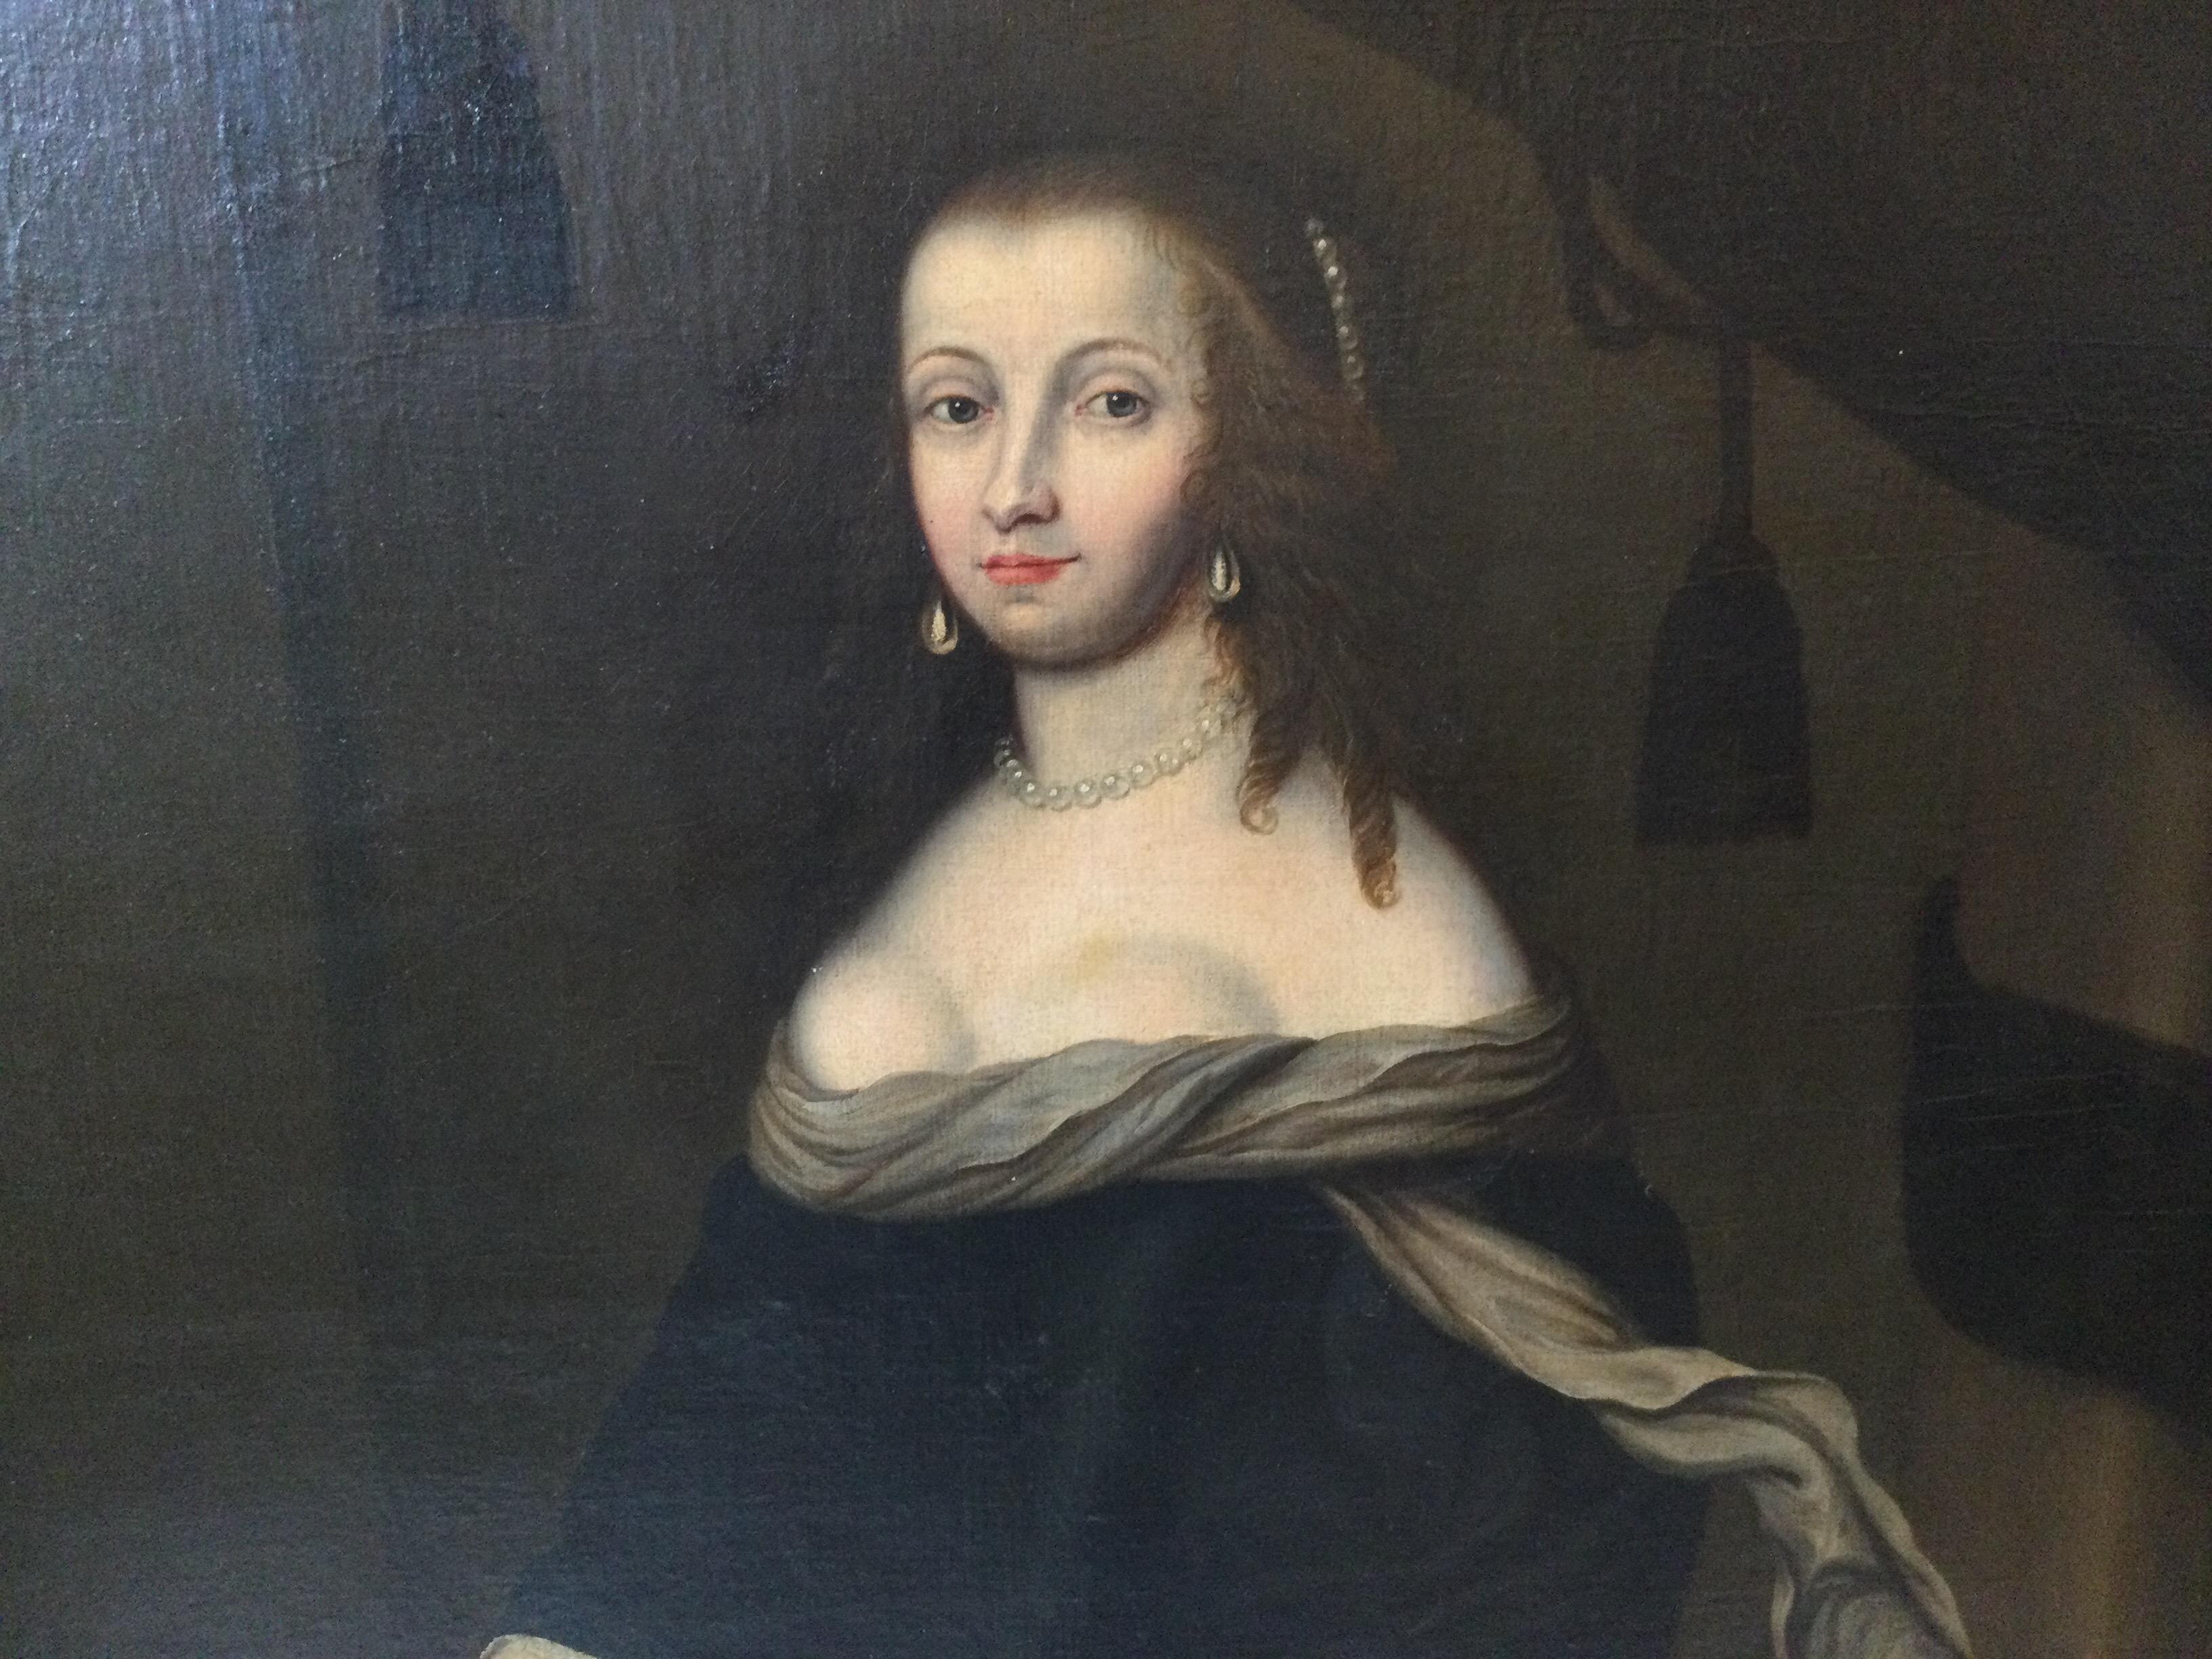 Hand-Painted 18th Century Portrait of an Aristocratic Lady, England